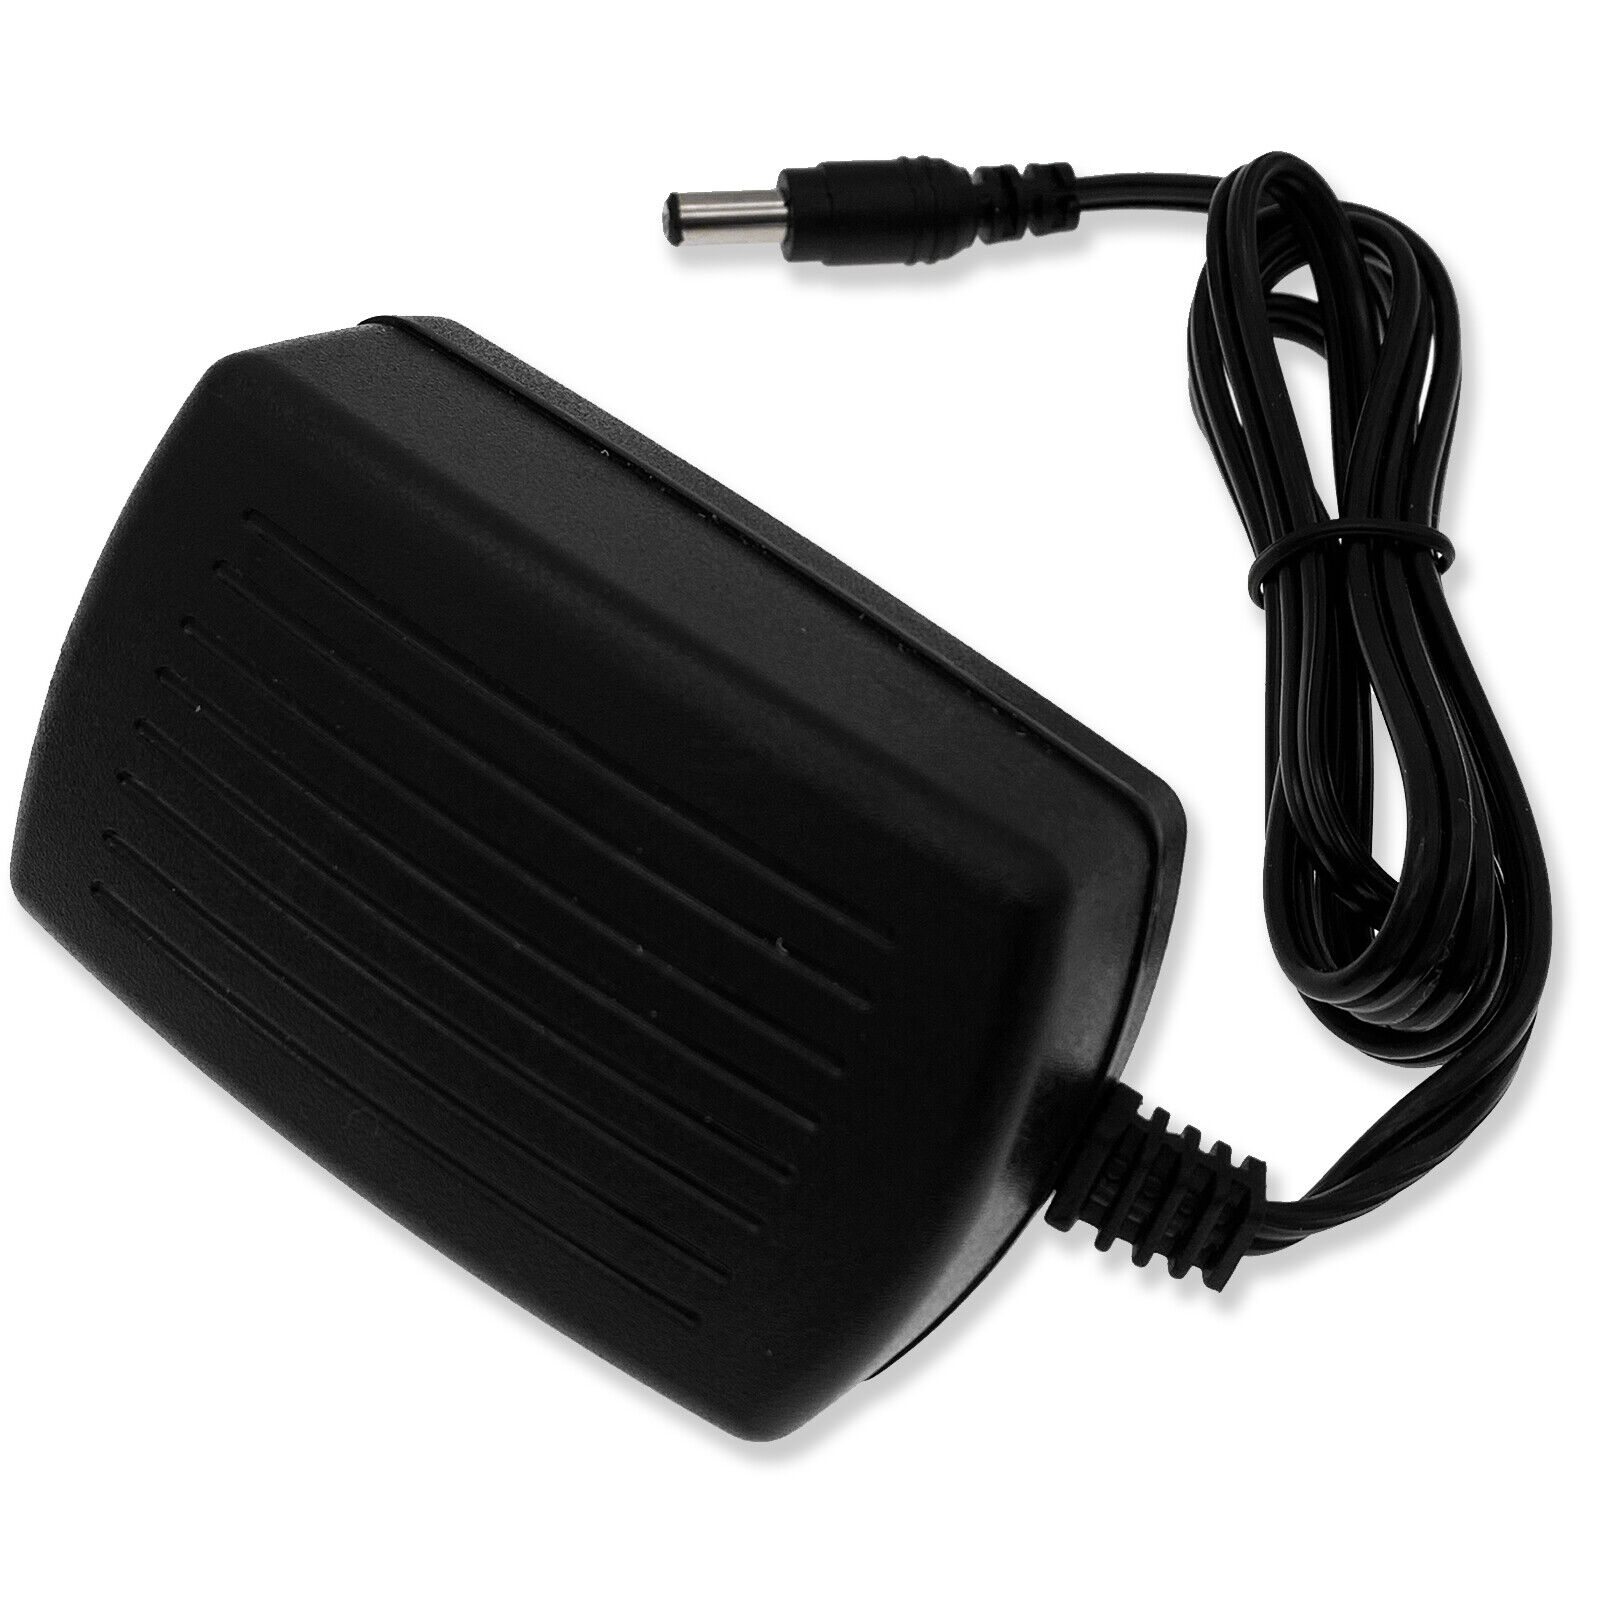 1x AC Adapter Power Charger For PNLV226CE PNLV226 5.5V 500MA Input: 220-240V Output: 5.5V 0.5A 1x AC Adapter Power